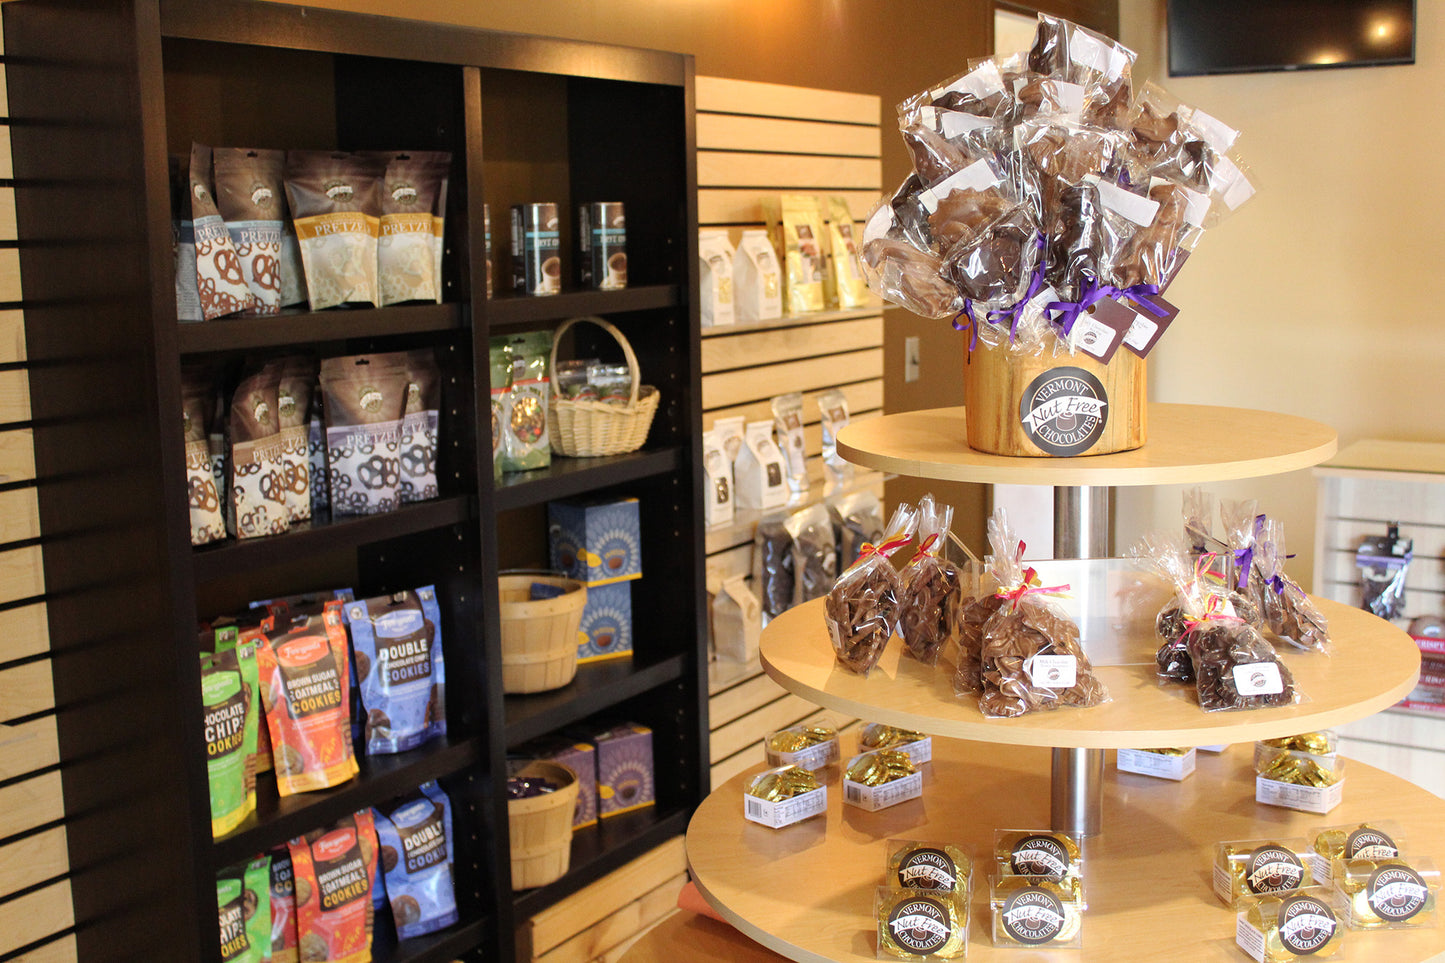 Inside of Vermont Nut Free Chocolates factory store. Shelves with bags of product. Table filled with smaller bags of product and chocolate pops.